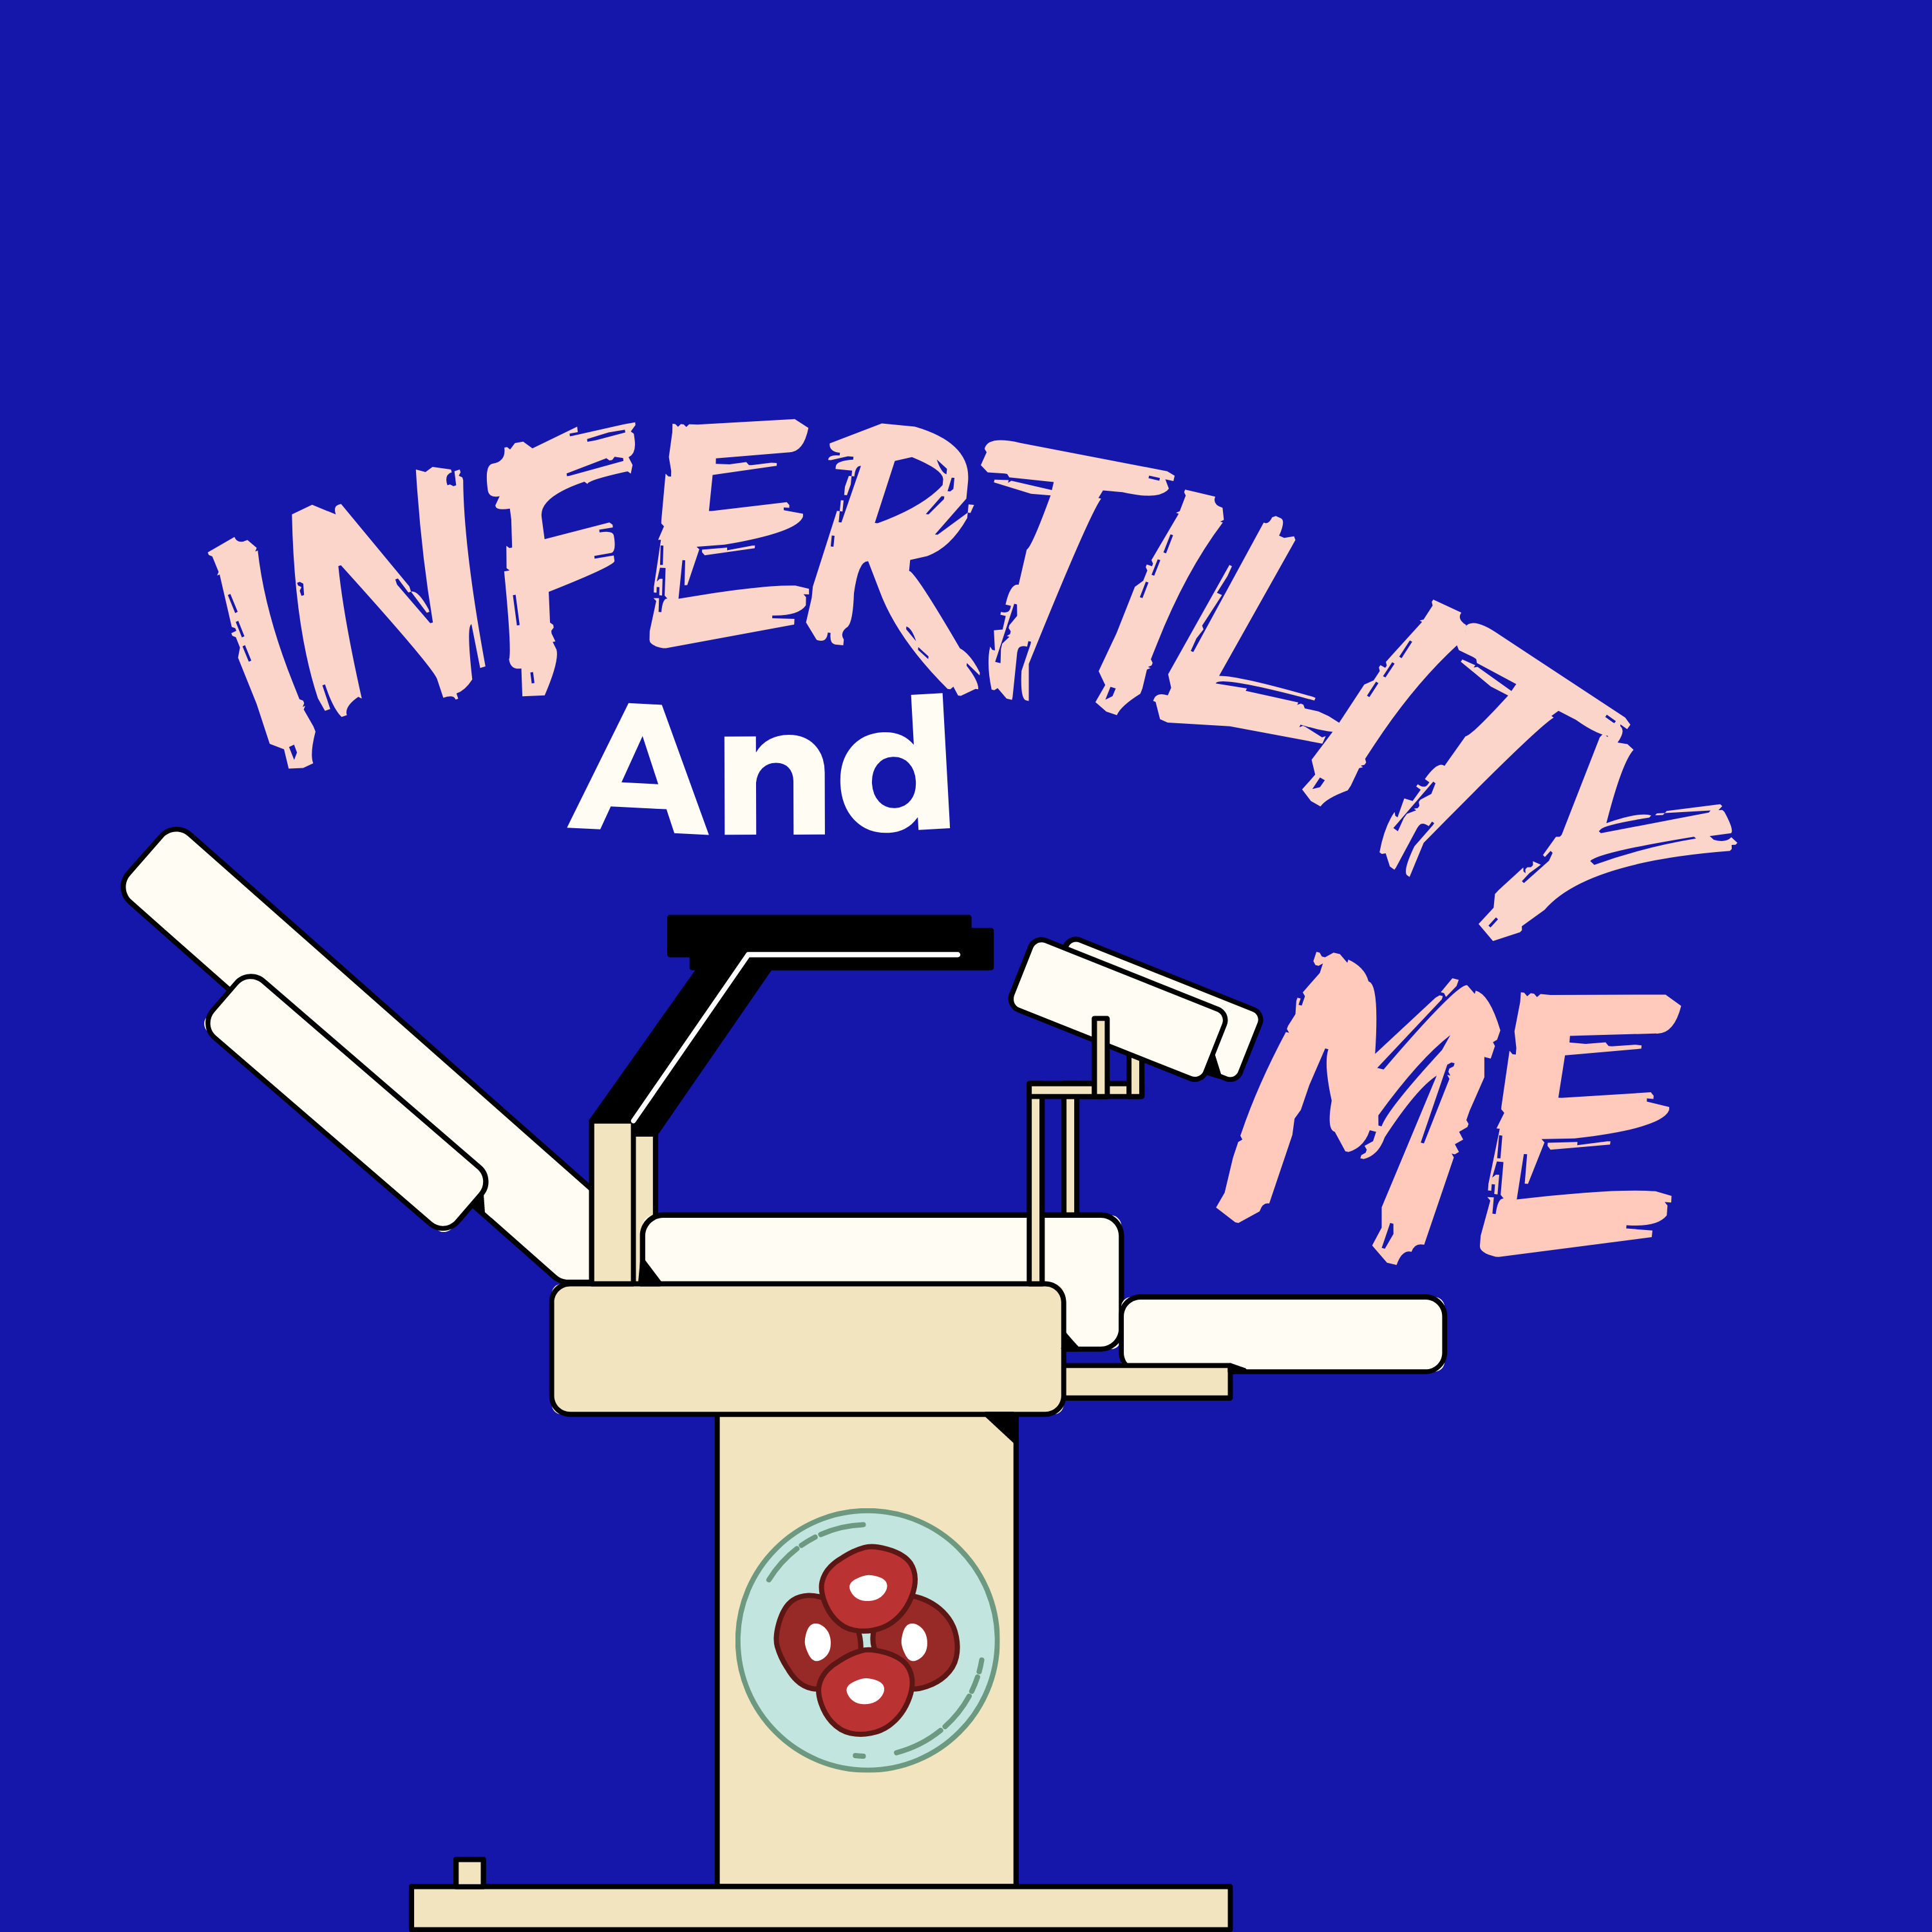 Coping with infertility during the holiday season